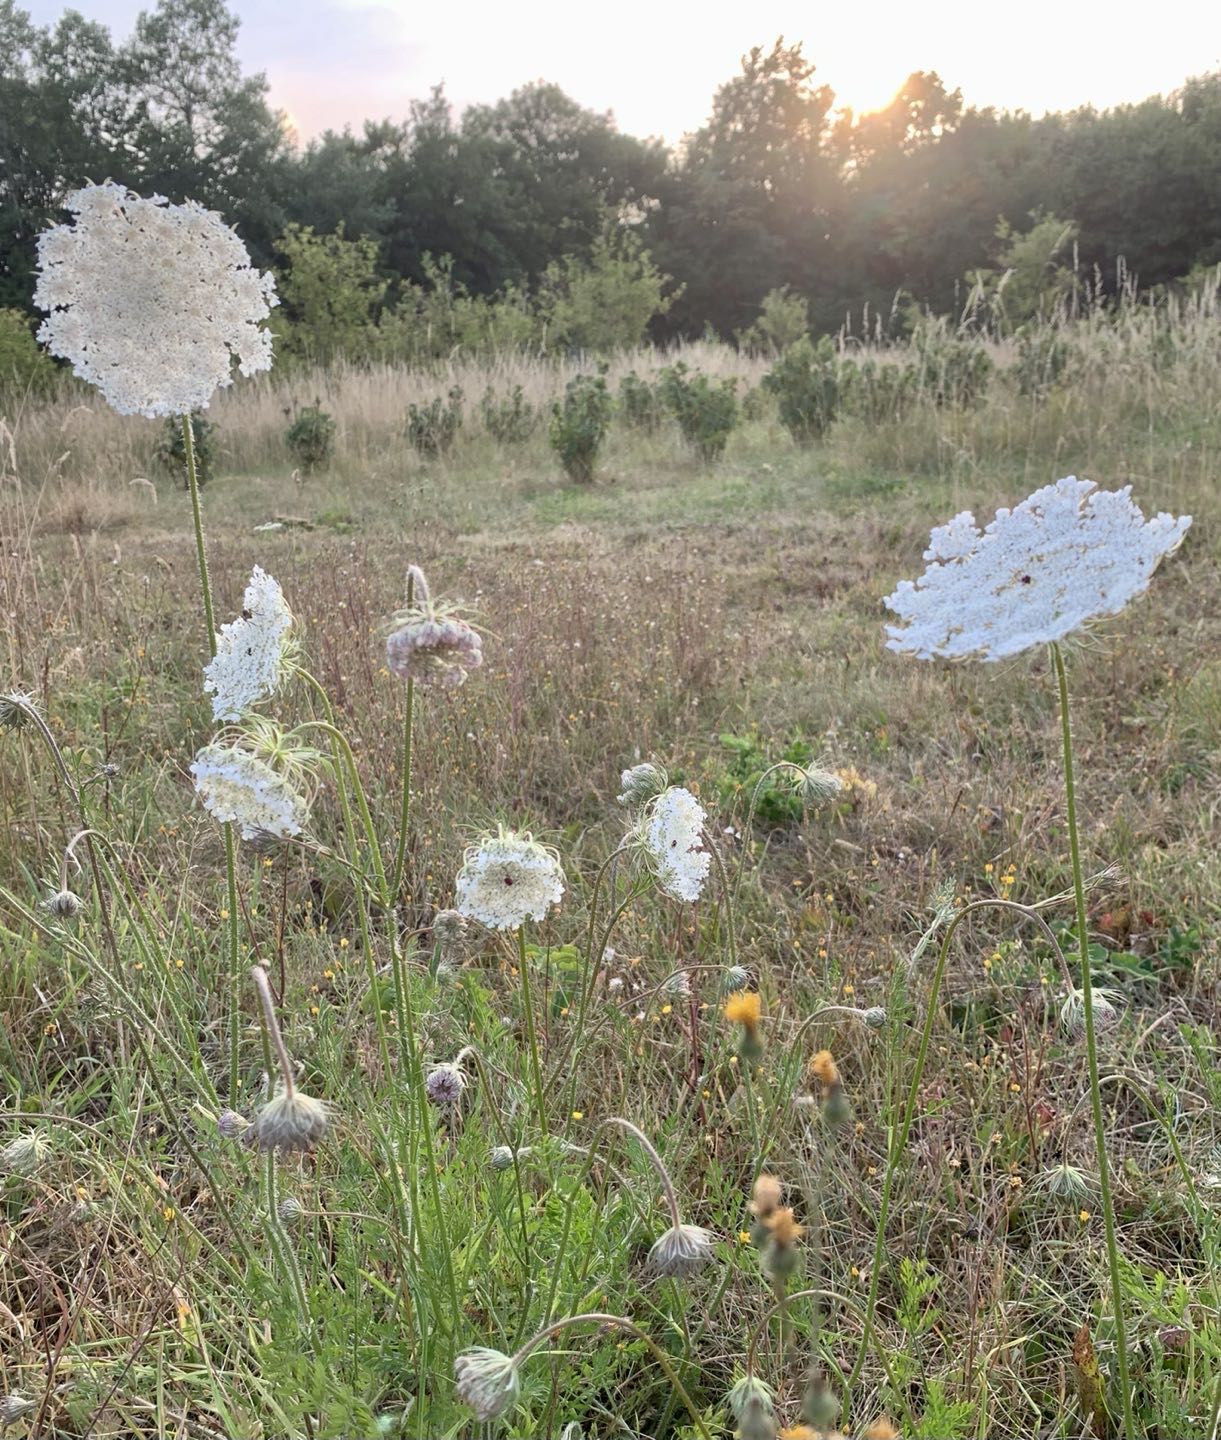 Queen Anne’s Lace in foreground, currants in mid ground on a coolish evening, braced for the heat storm tomorrow, wish them luck! #cotswolds #artisan #organic #liqueurs #rewilding #phewwhatascorchet